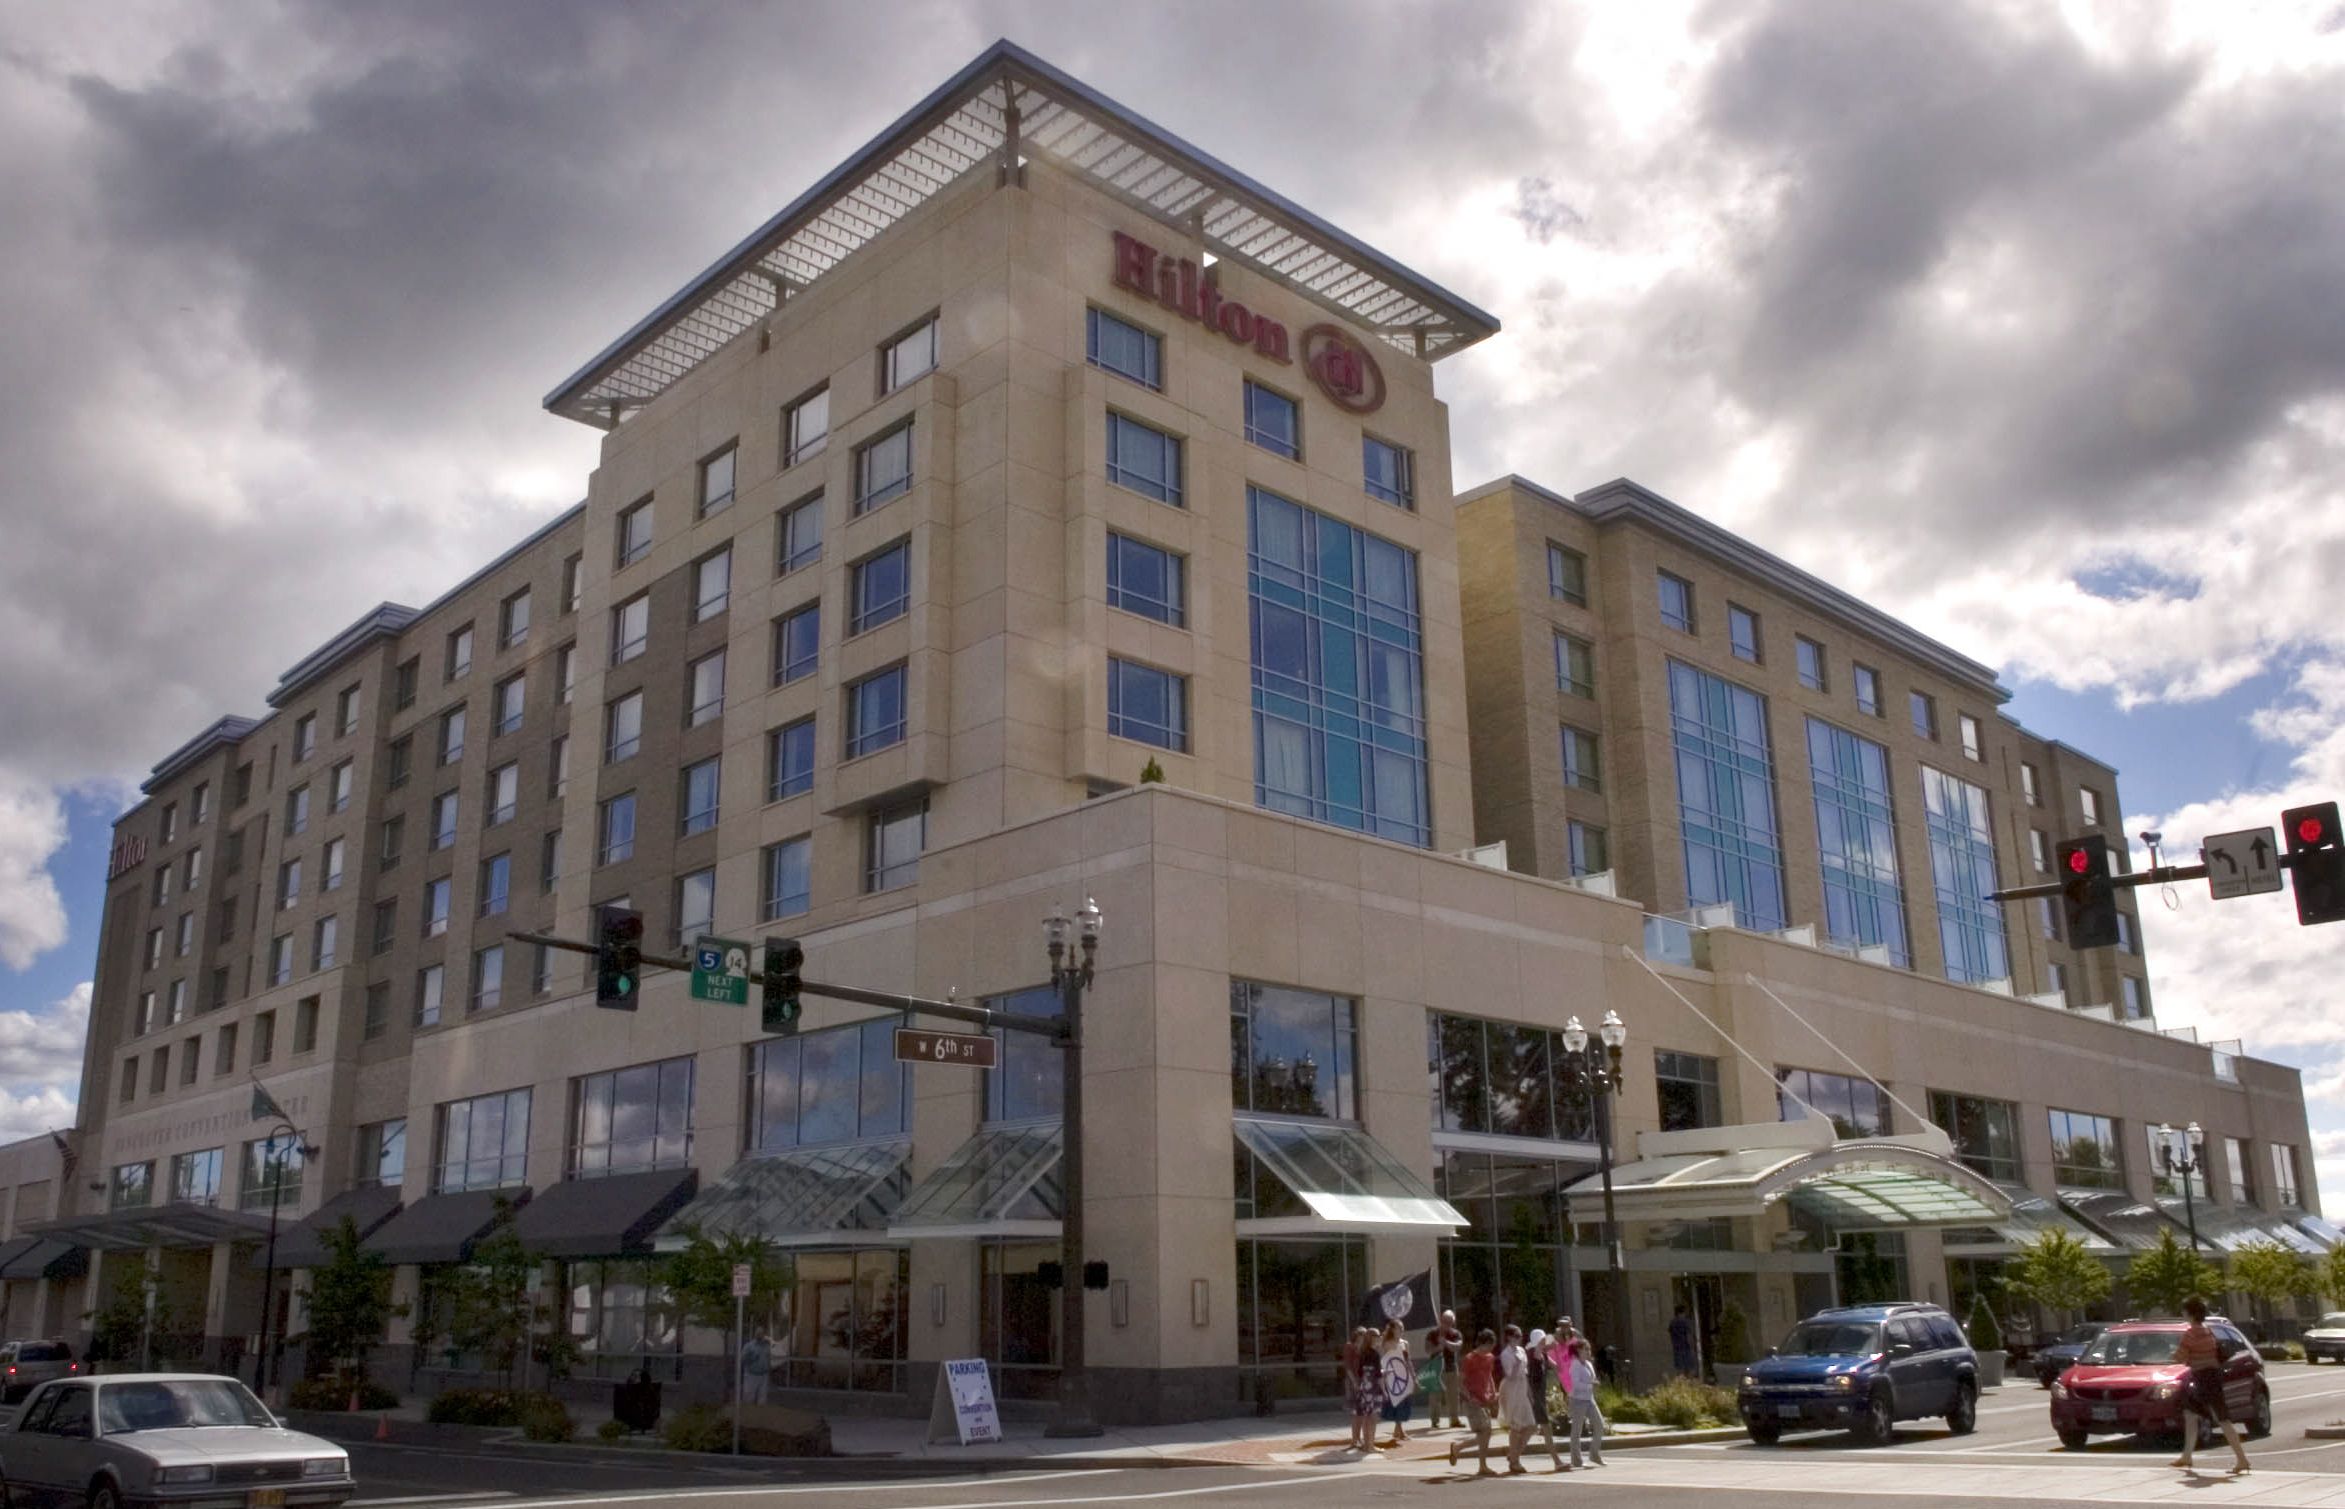 Vancouver staff met with Clark County to seek new terms on debt being accumulated by the Hilton Vancouver Washington.